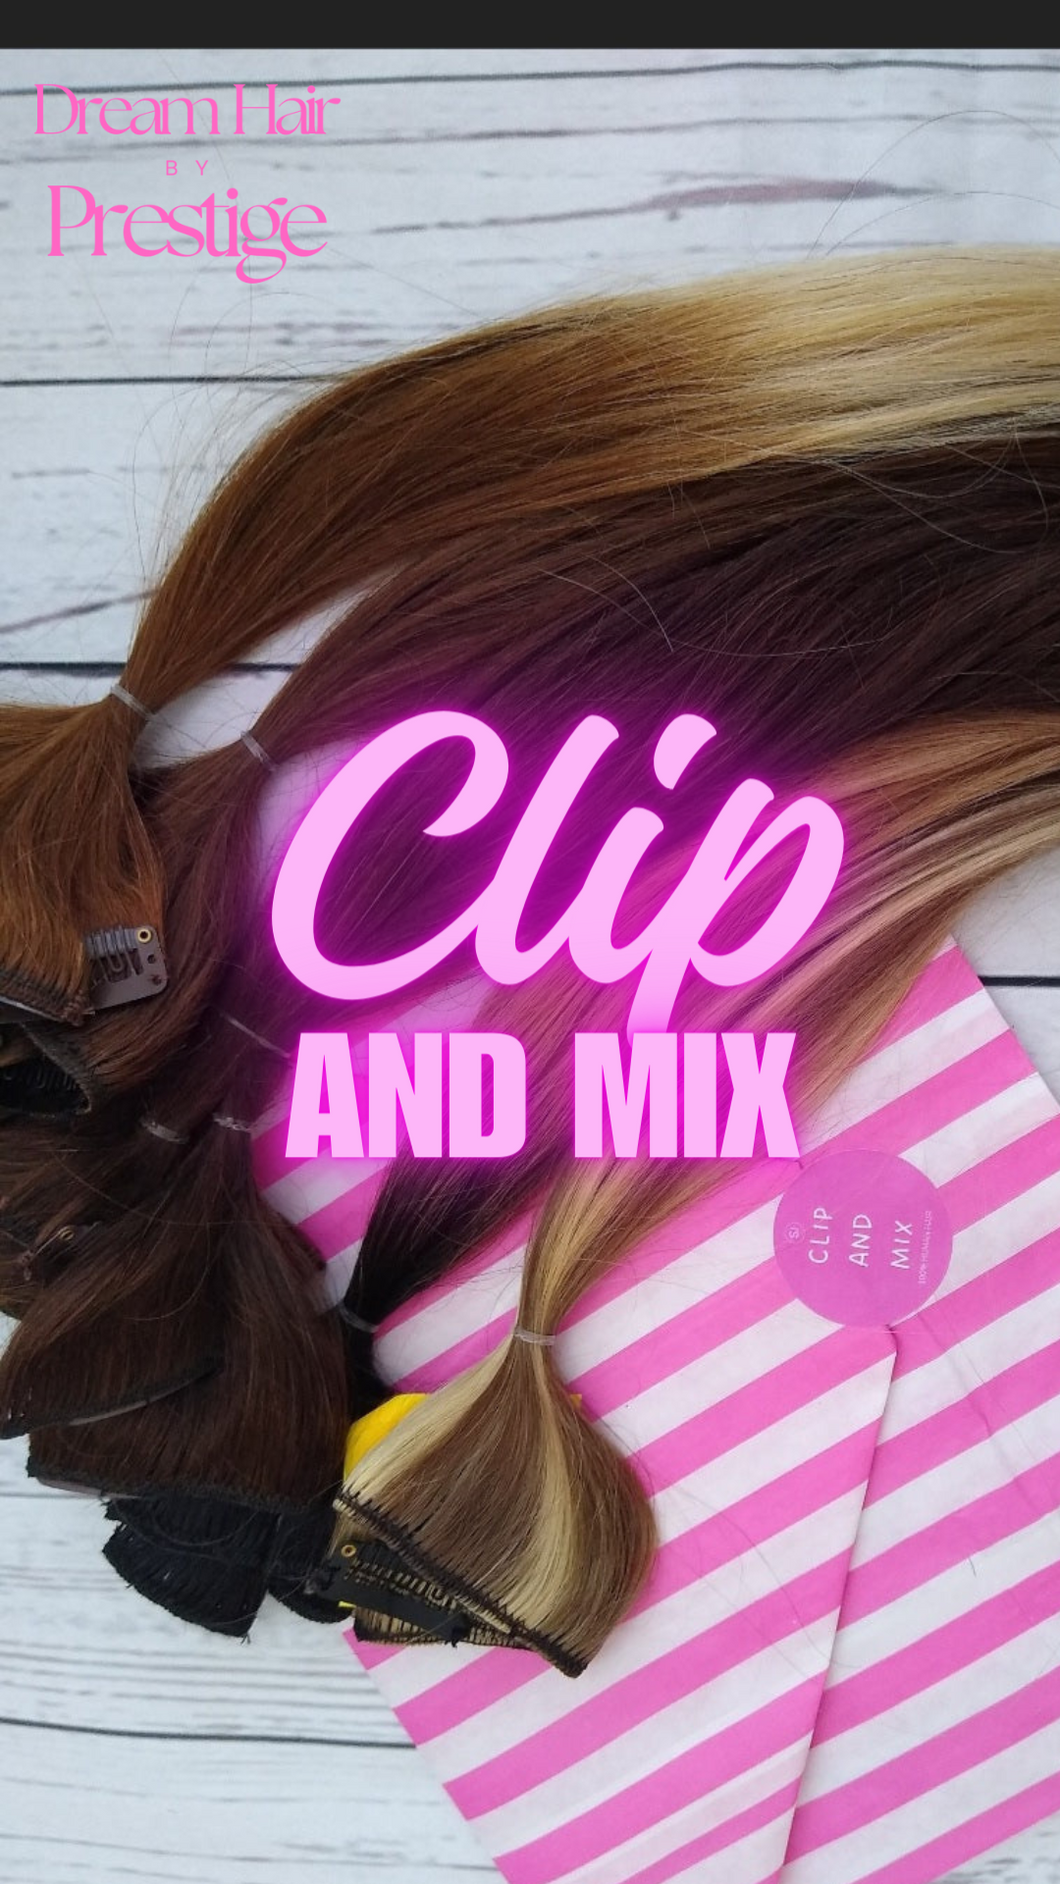 Clip and Mix- Human hair extension, 4 inch clip in, choose colour, 16/18/20 inches long single weft